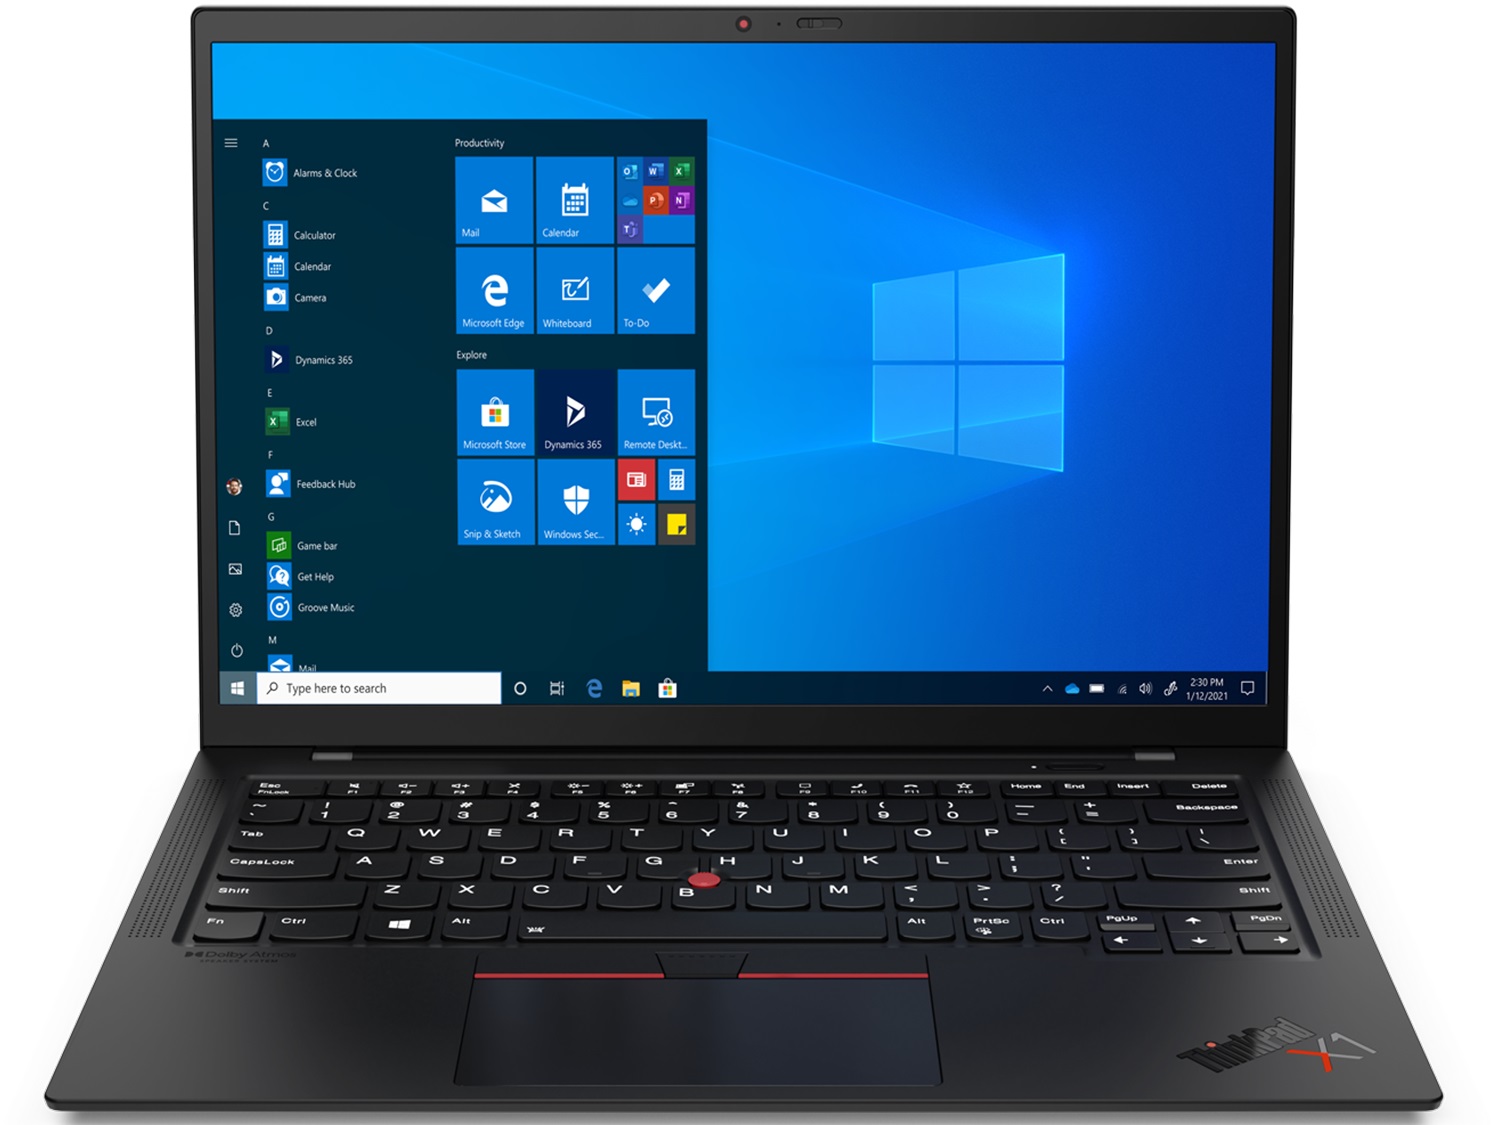 Lenovo ThinkPad X1 Carbon (9th Gen, 2021) - Specs, Tests, and 